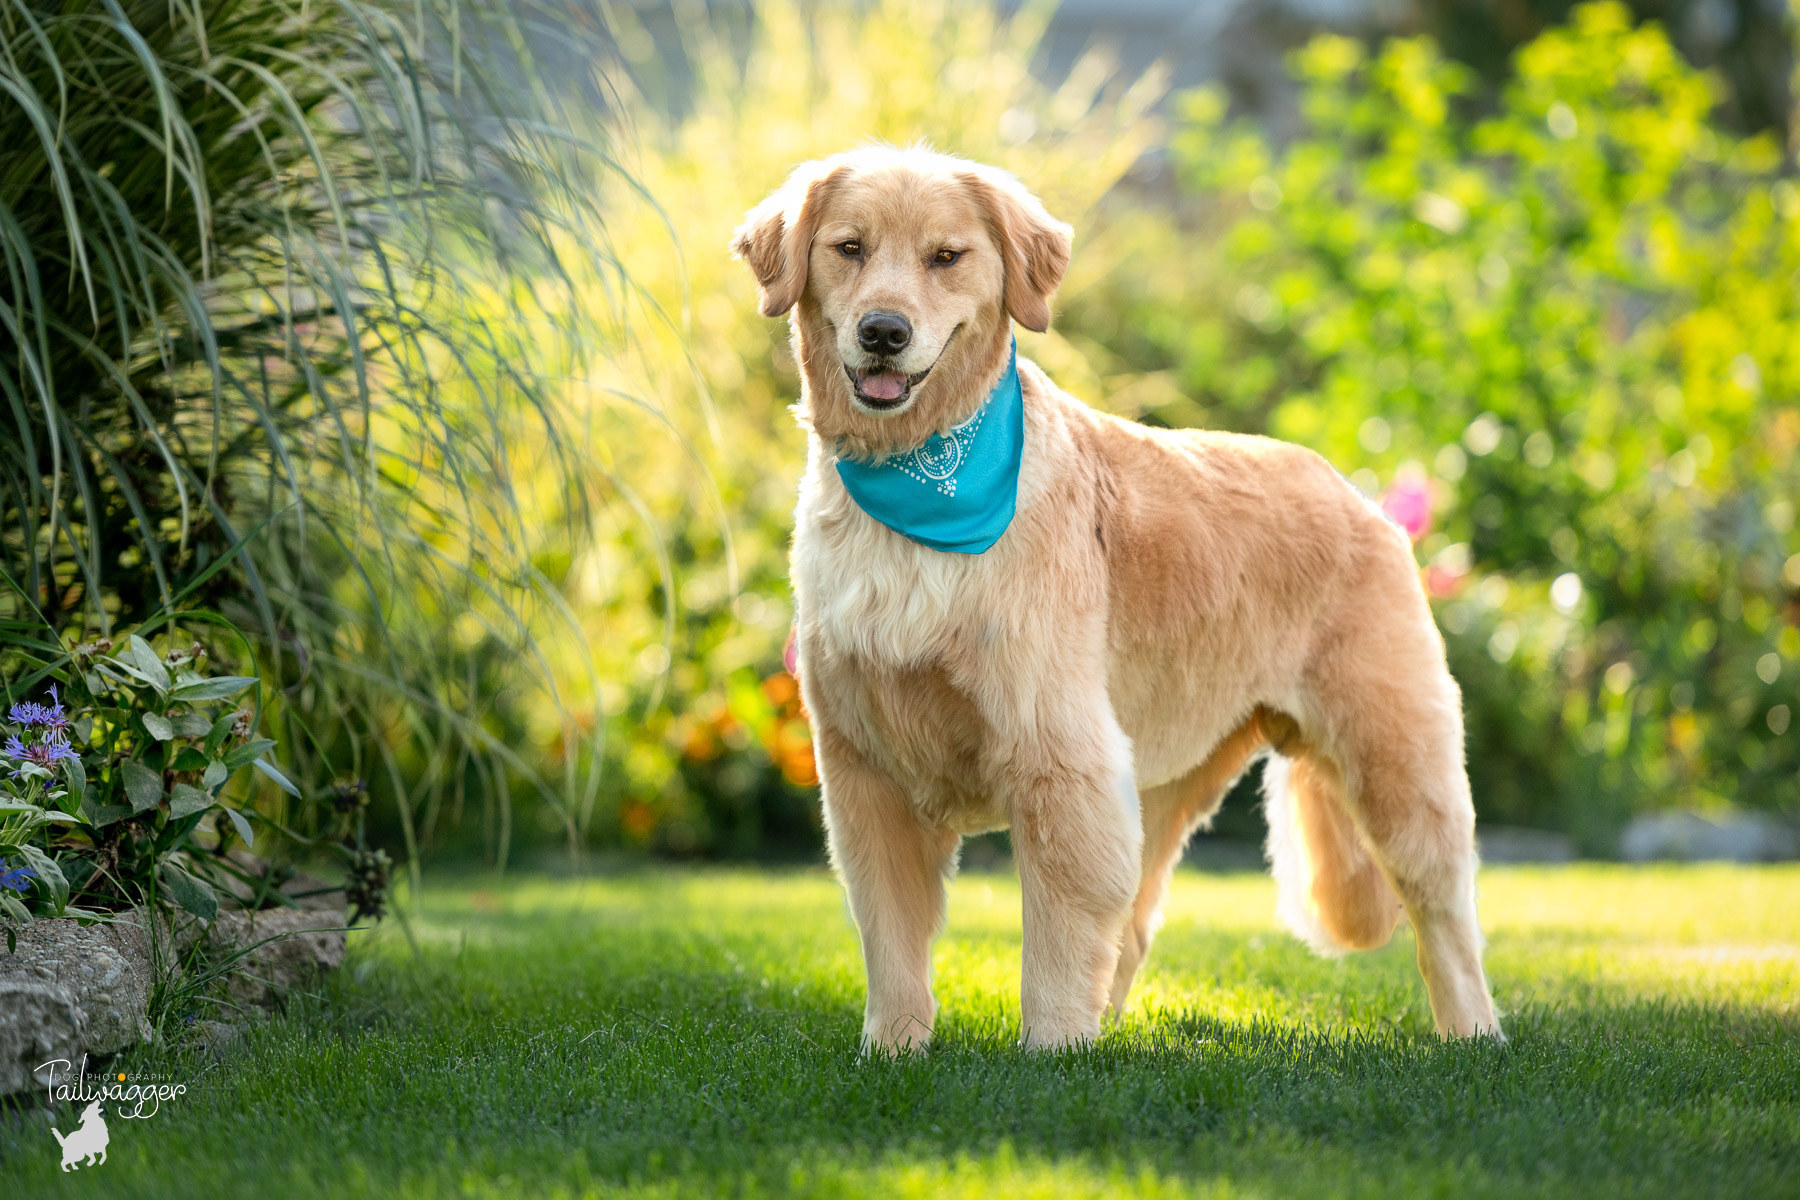 Male Golden Retriever with colorful bandana standing in front of flowers in Wyoming, MI.